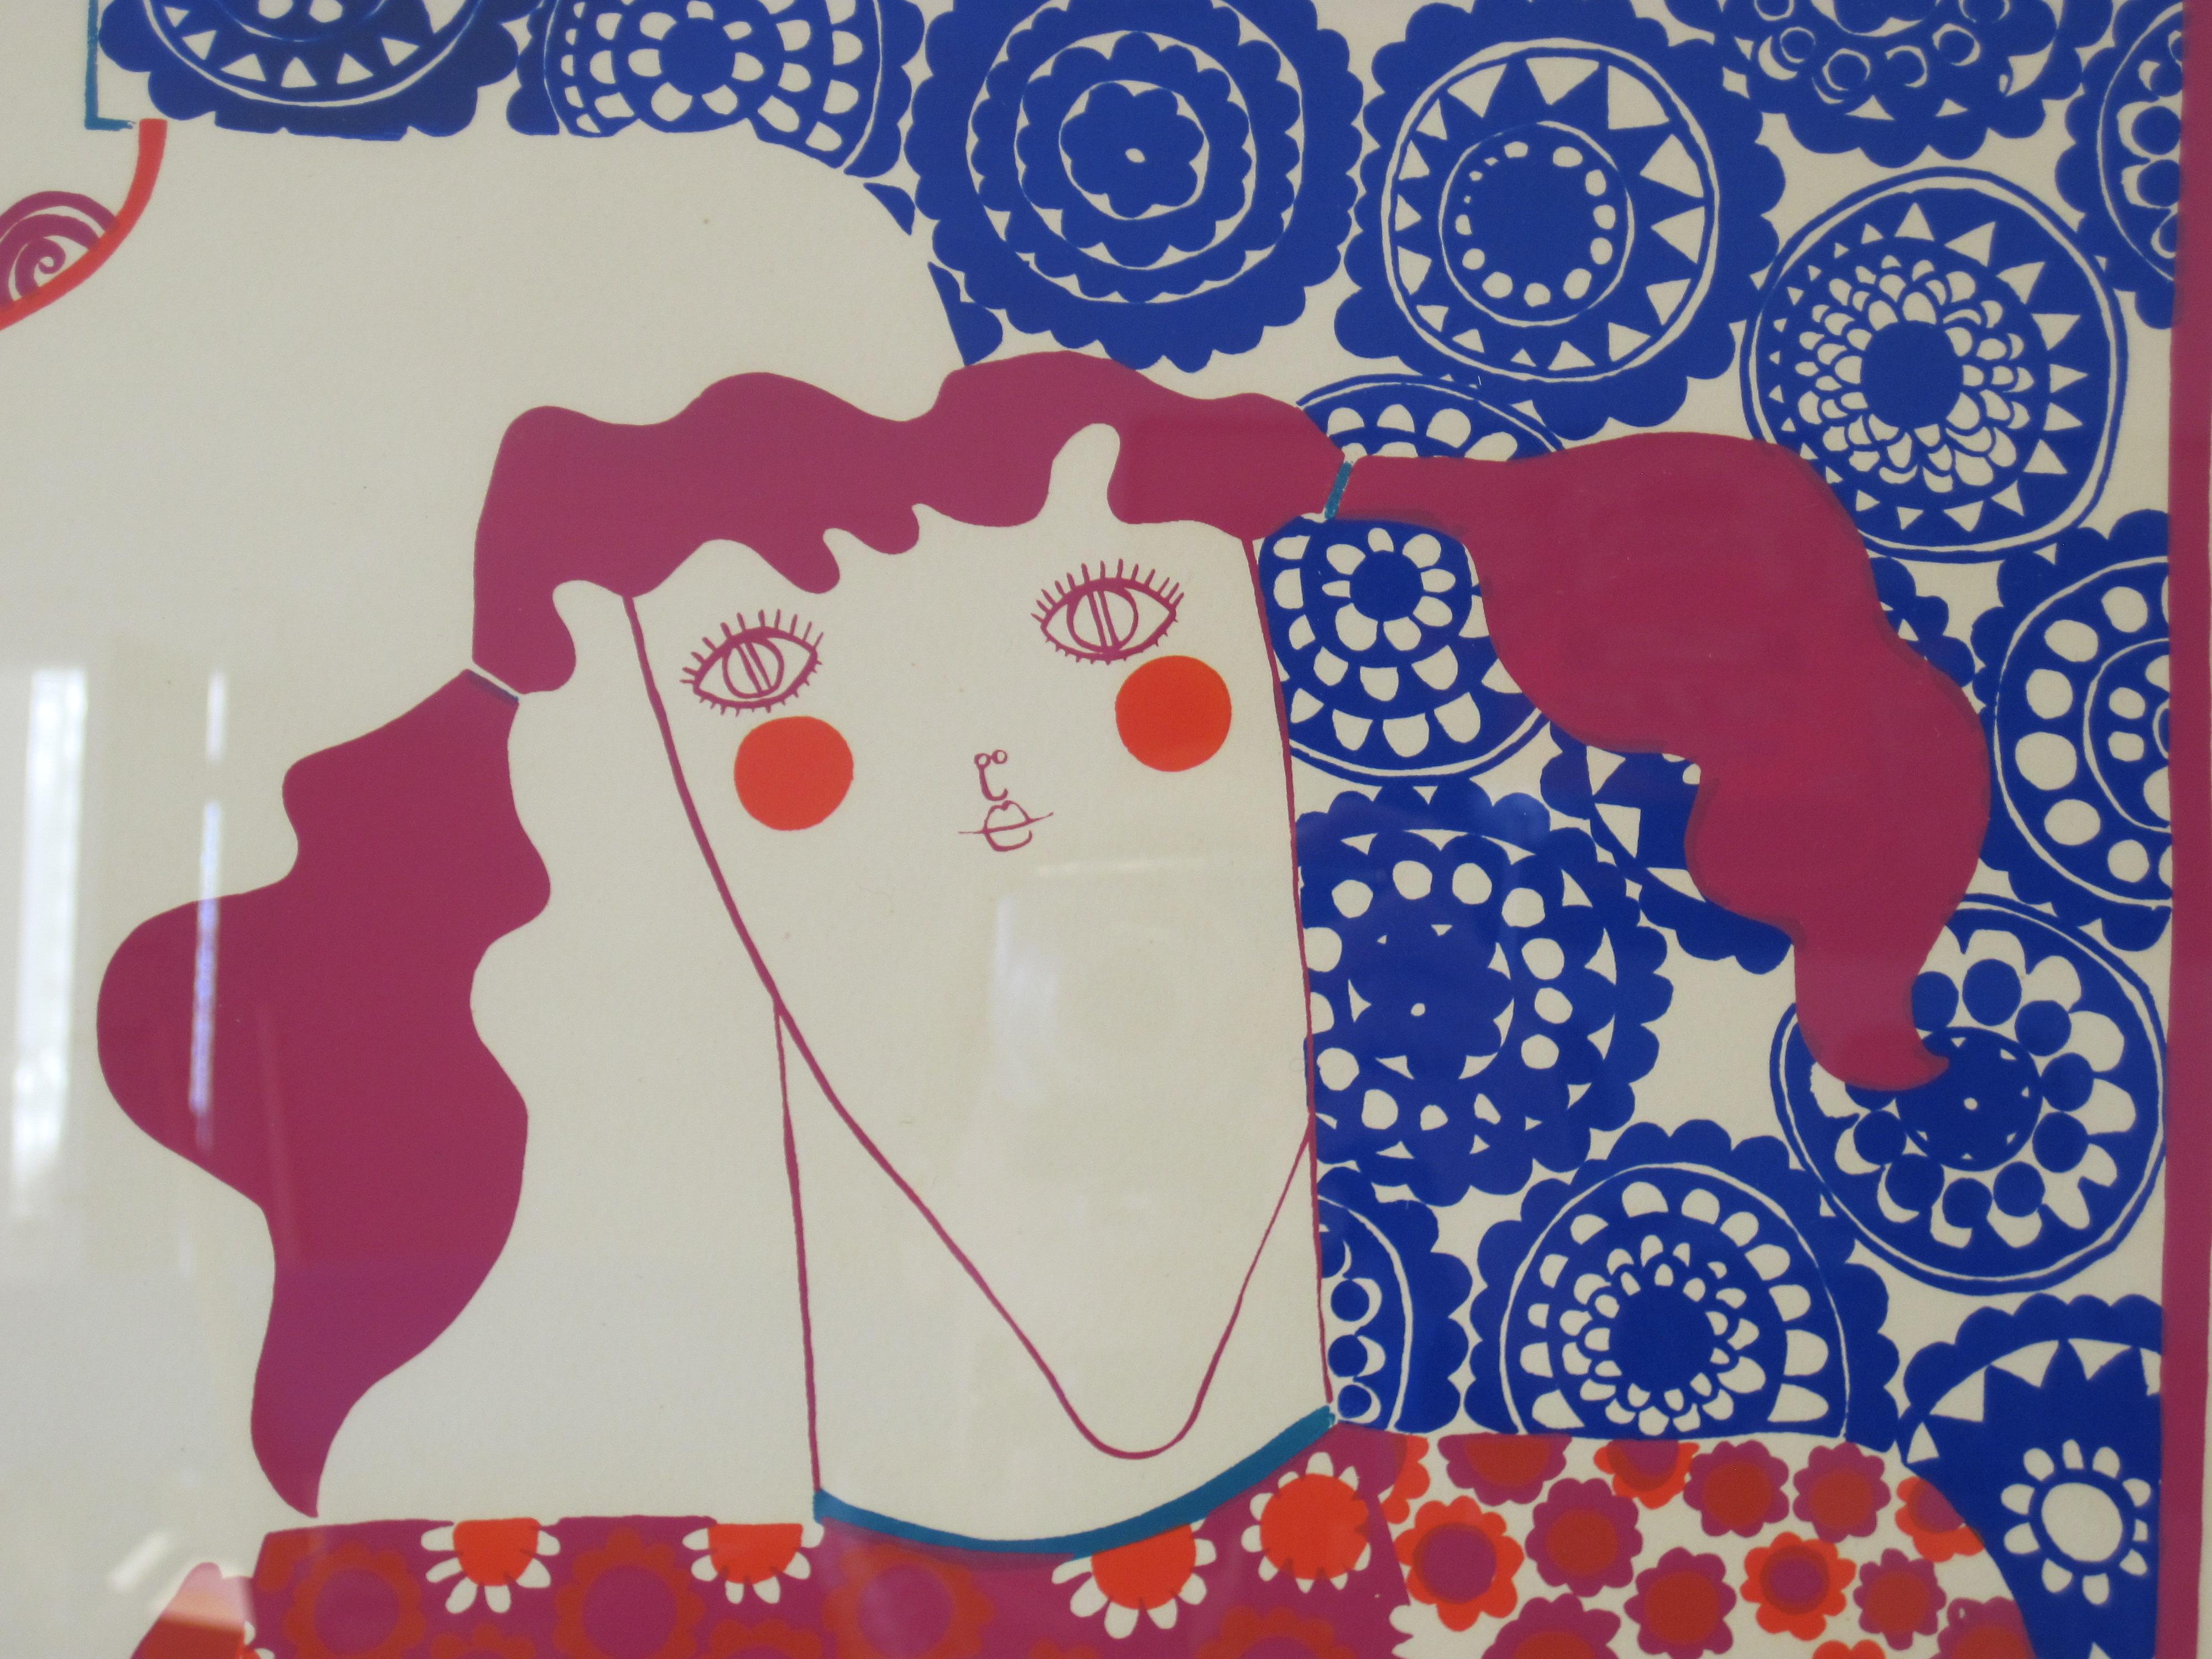 Mod Era Vividly Colored Silkscreen on Paper by Myfanwy Phillips For Sale 3